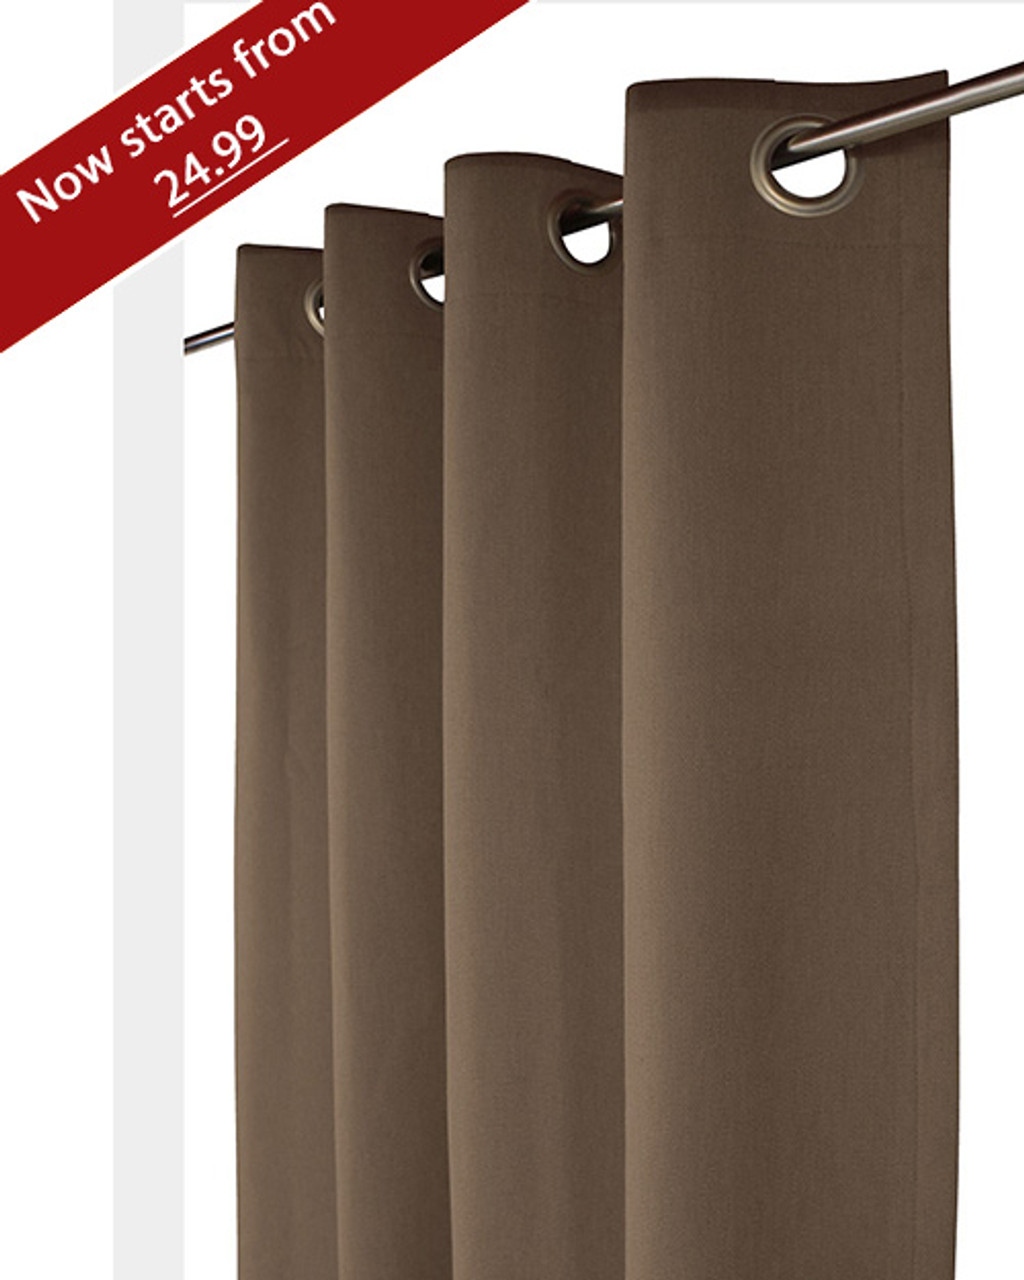 Light out curtain Grommet Top plain Design-Tan -Polyester- 56x96 inches-26